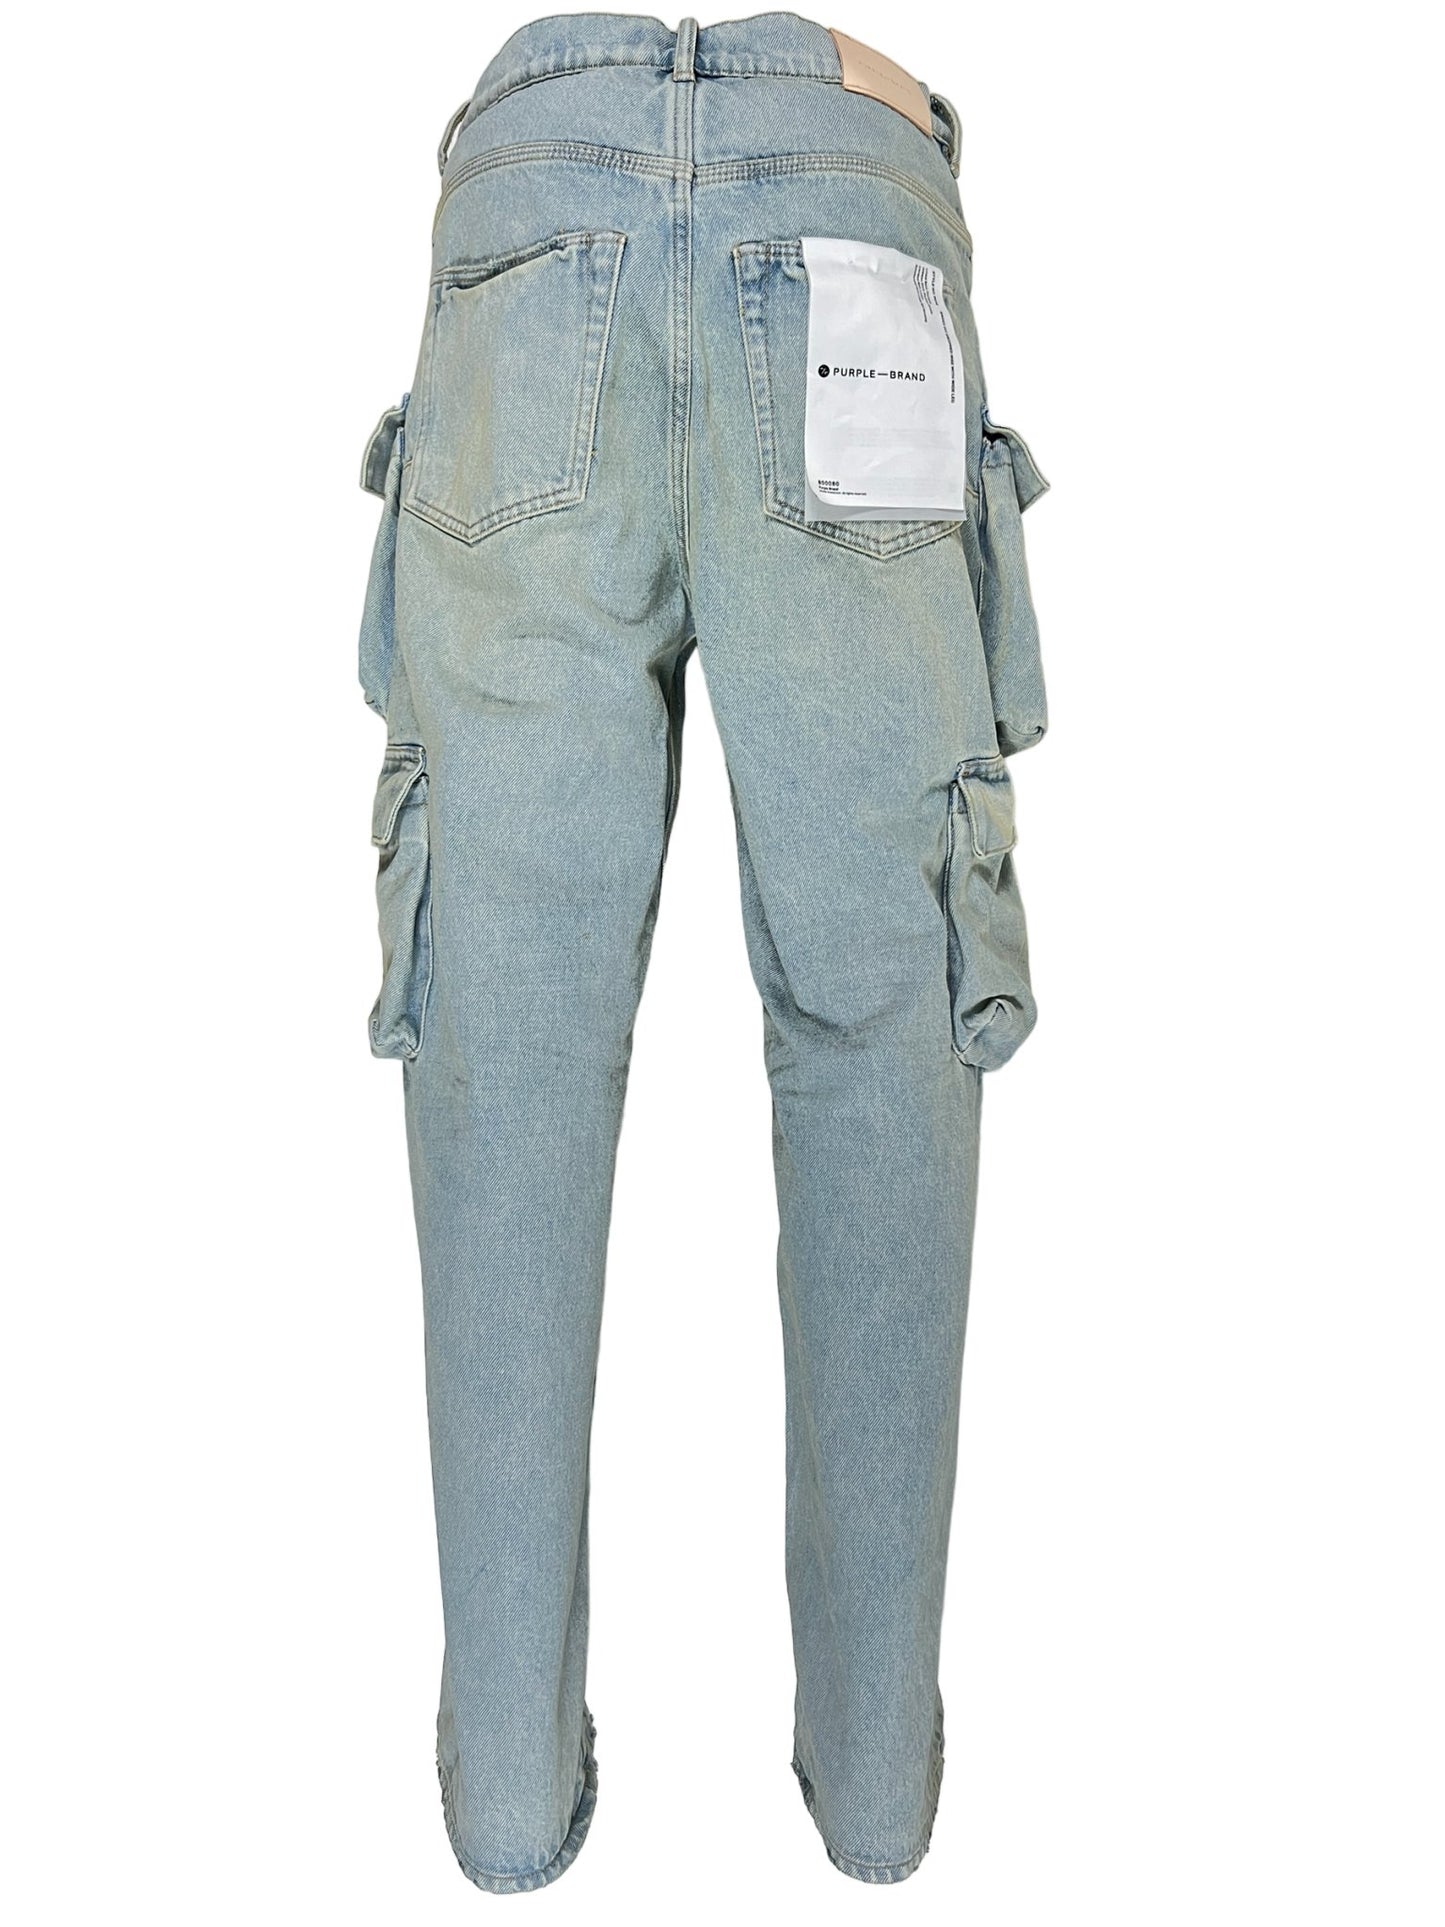 A pair of mid-rise PURPLE BRAND P018-BGLI RELAXED DOUBLE CARGO LT INDIGO stretch denim cargo pants.